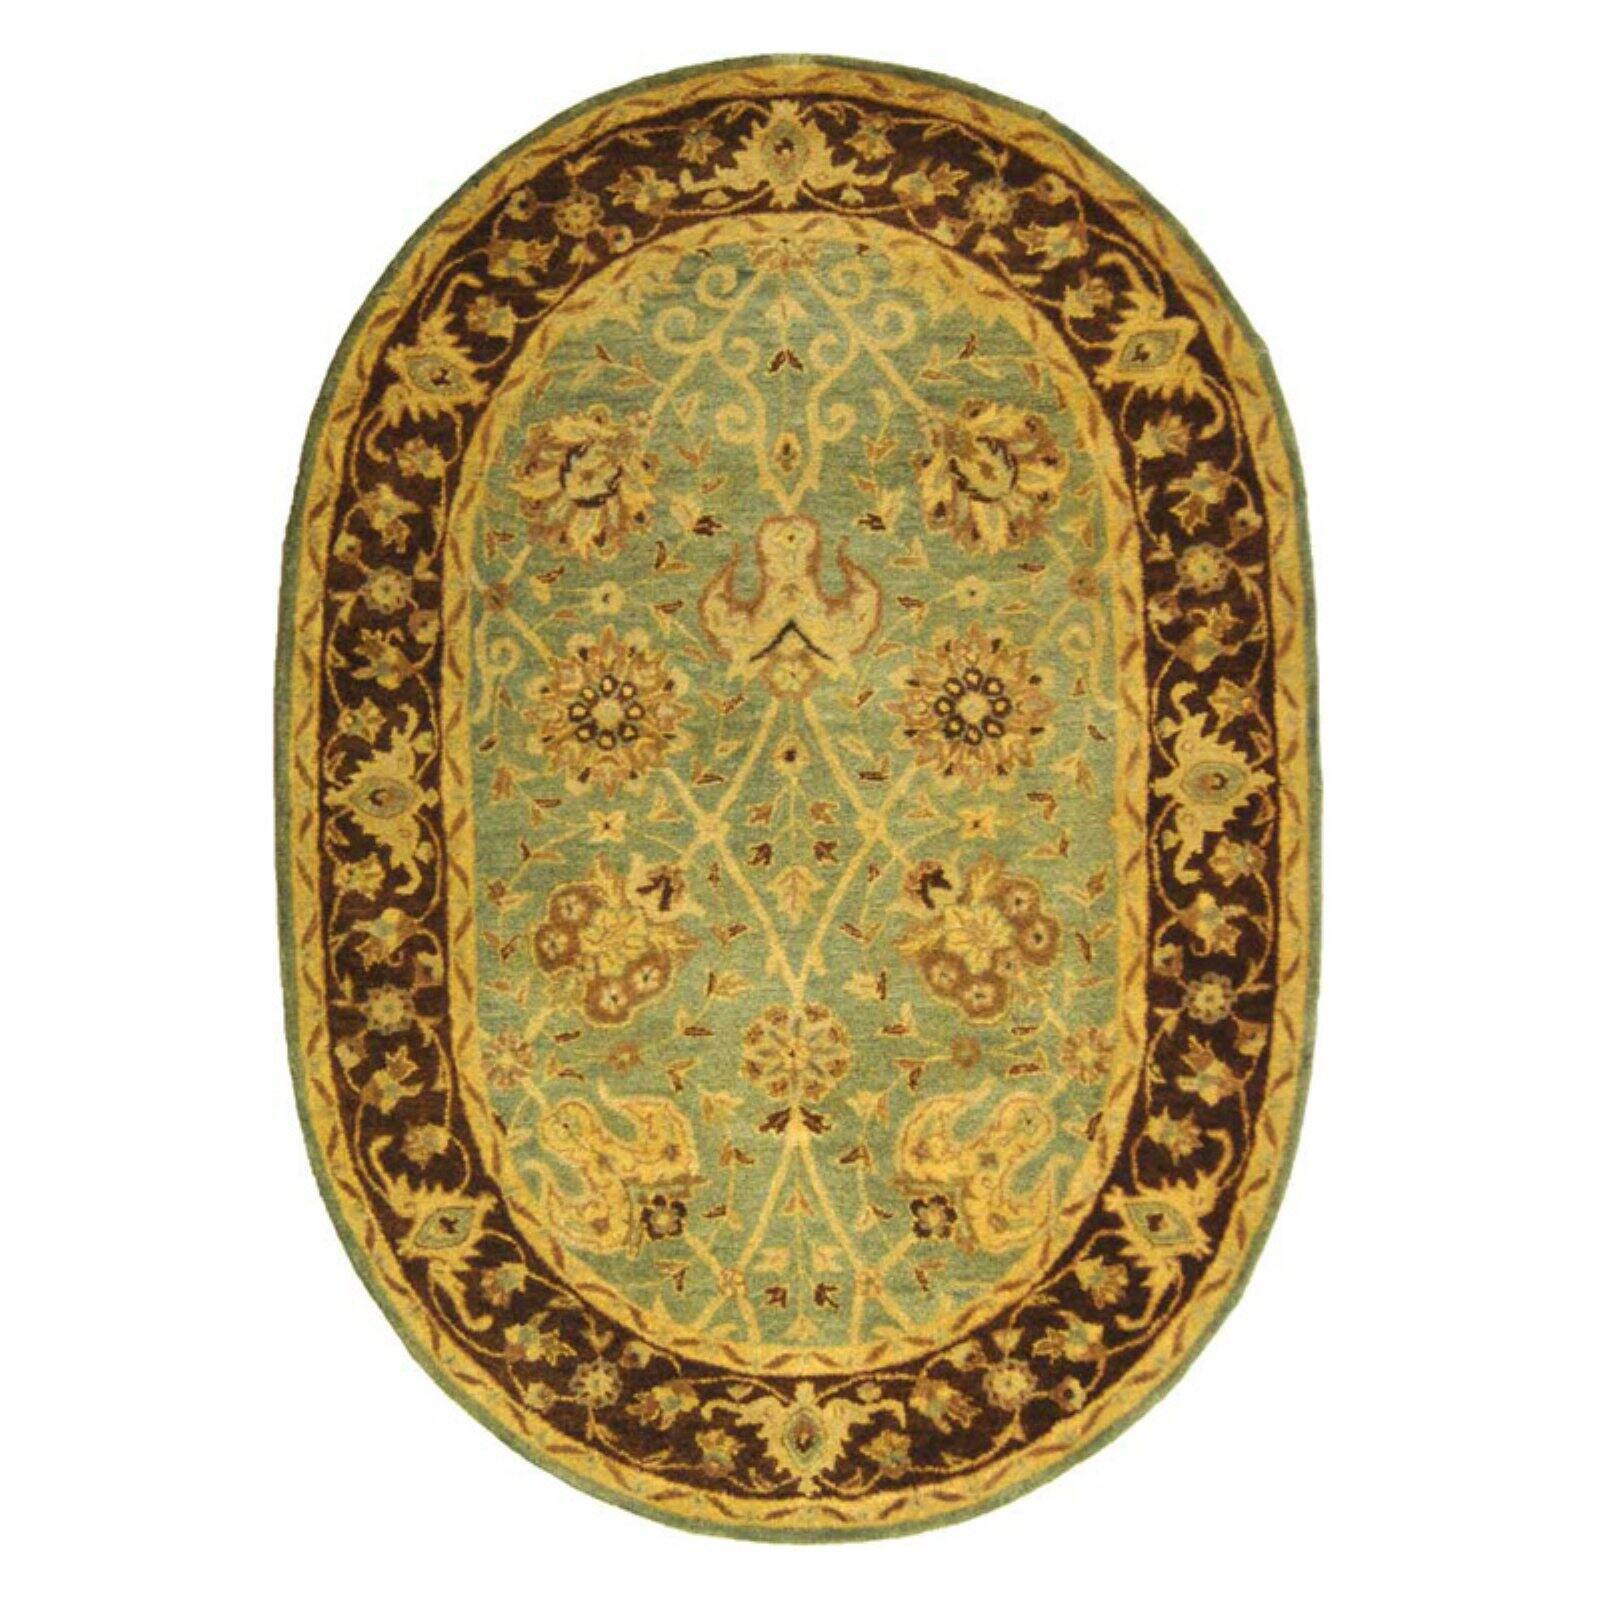 SAFAVIEH Antiquity Lilibeth Traditional Floral Wool Runner Rug, Green/Brown, 2'3" x 8' - image 5 of 8